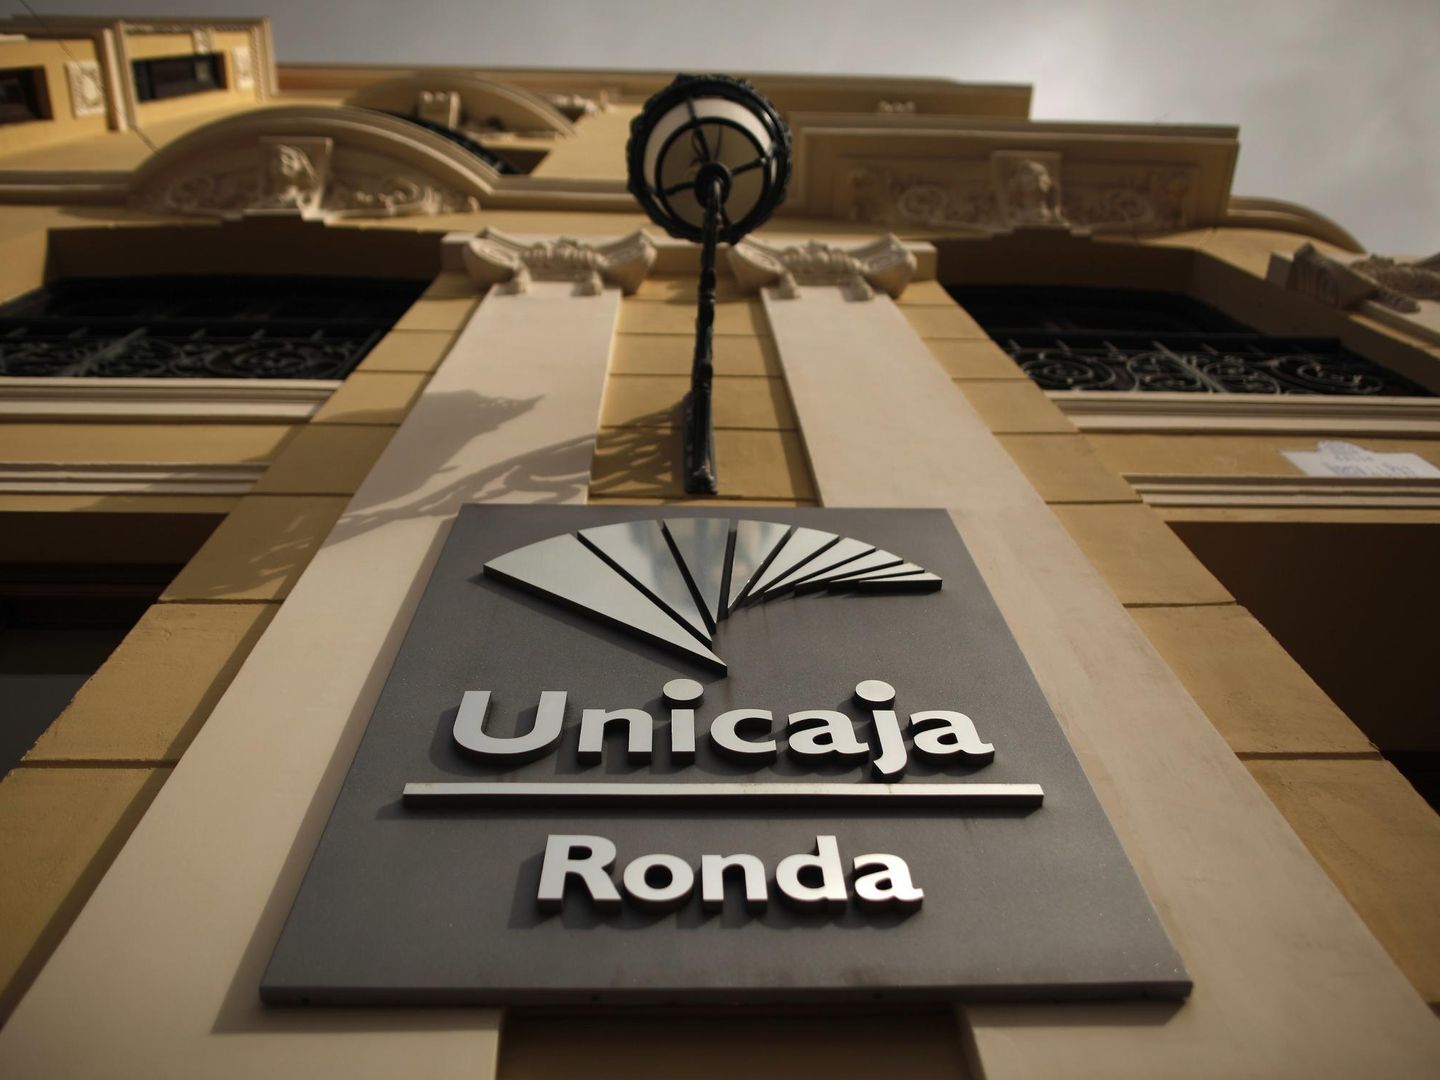 The logo of Unicaja bank is seen on the facade of a Unicaja bank branch in downtown Ronda, near Malaga January 29, 2014. Spain's bank restructuring fund FROB has committed to pay up to 319 million euros (6 million) in state aid to lender Unicaja to absorb smaller peer Banco Ceiss and avoid the latter's nationalisation. REUTERS/Jon Nazca (SPAIN - Tags: BUSINESS LOGO)